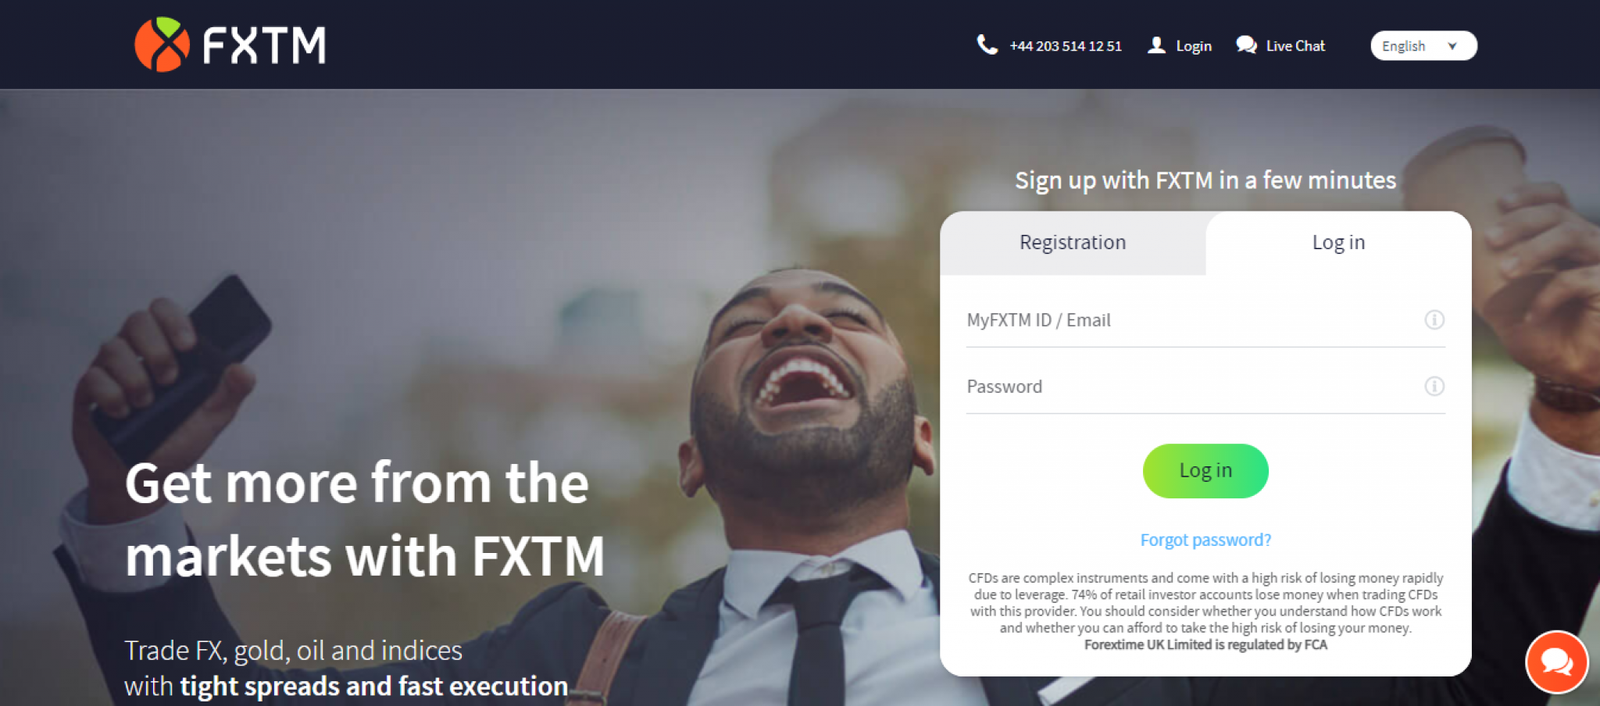 FXTM Review 2021 | Top Trusted Brokers - Top Trusted Forex ...